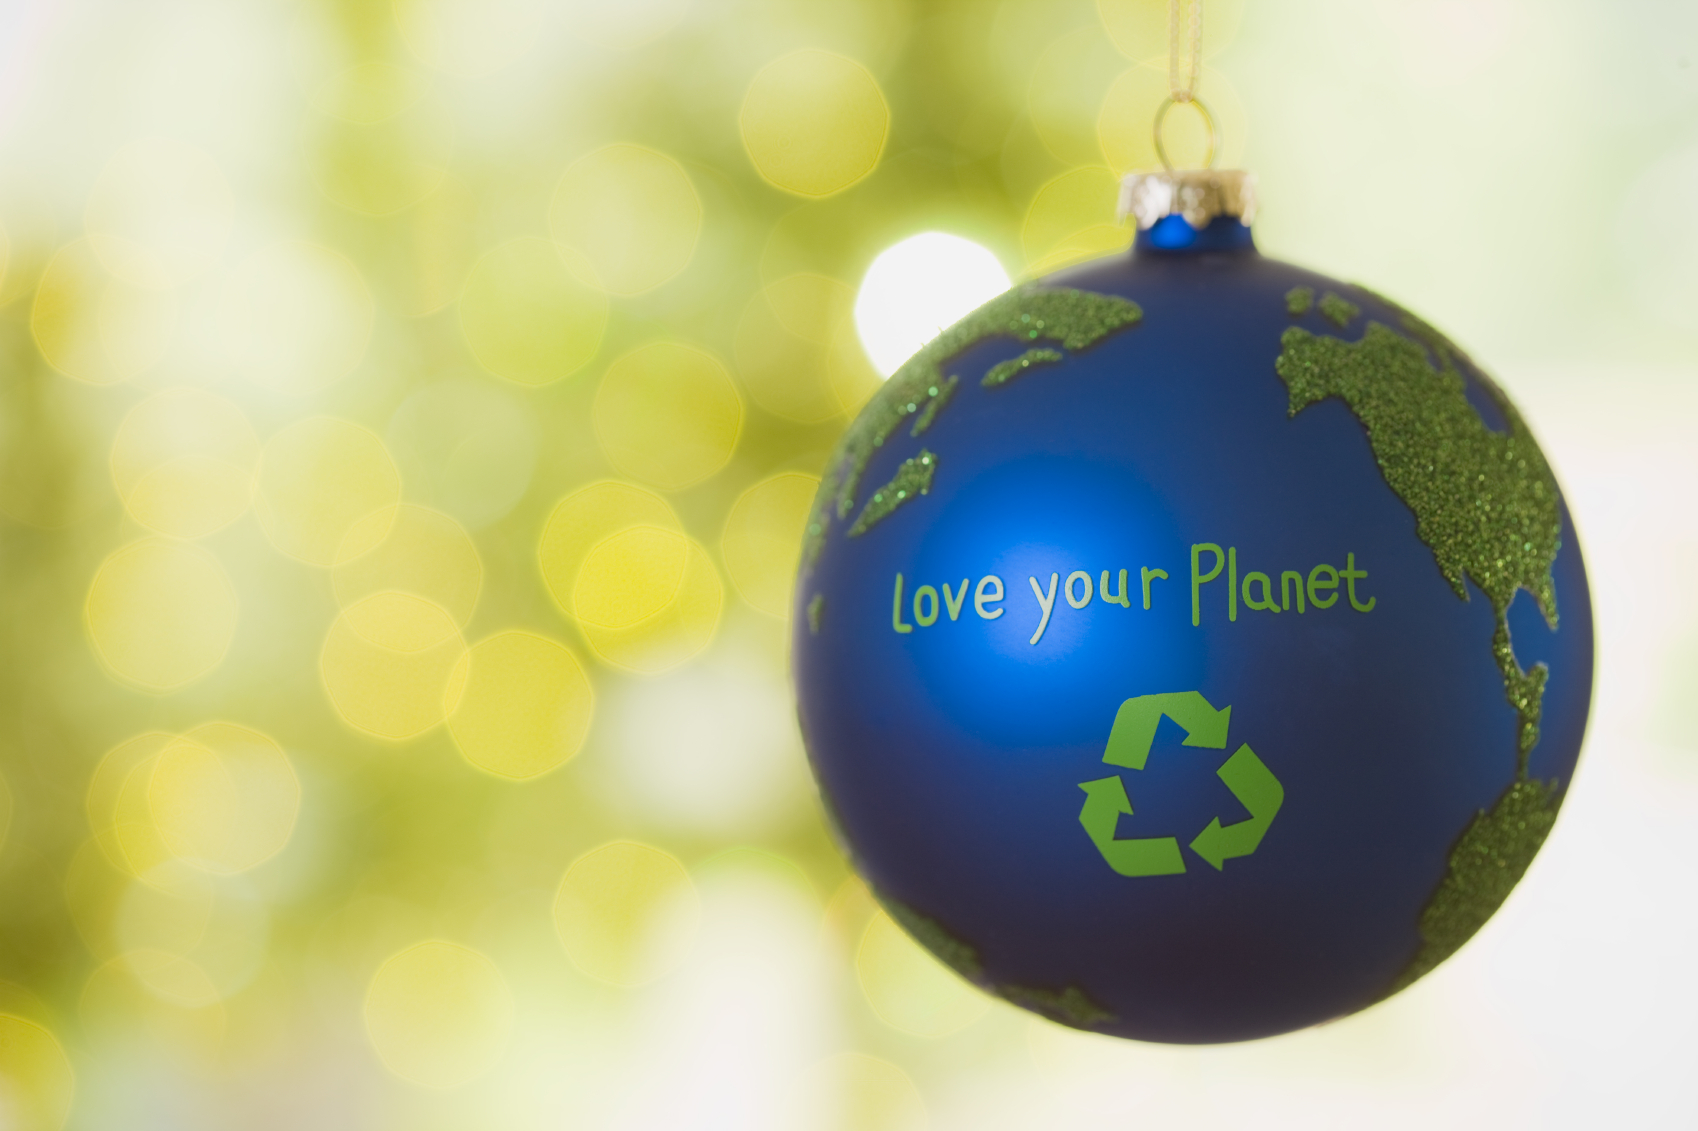 A Green Christmas: Tips for an Eco-Friendly Holiday